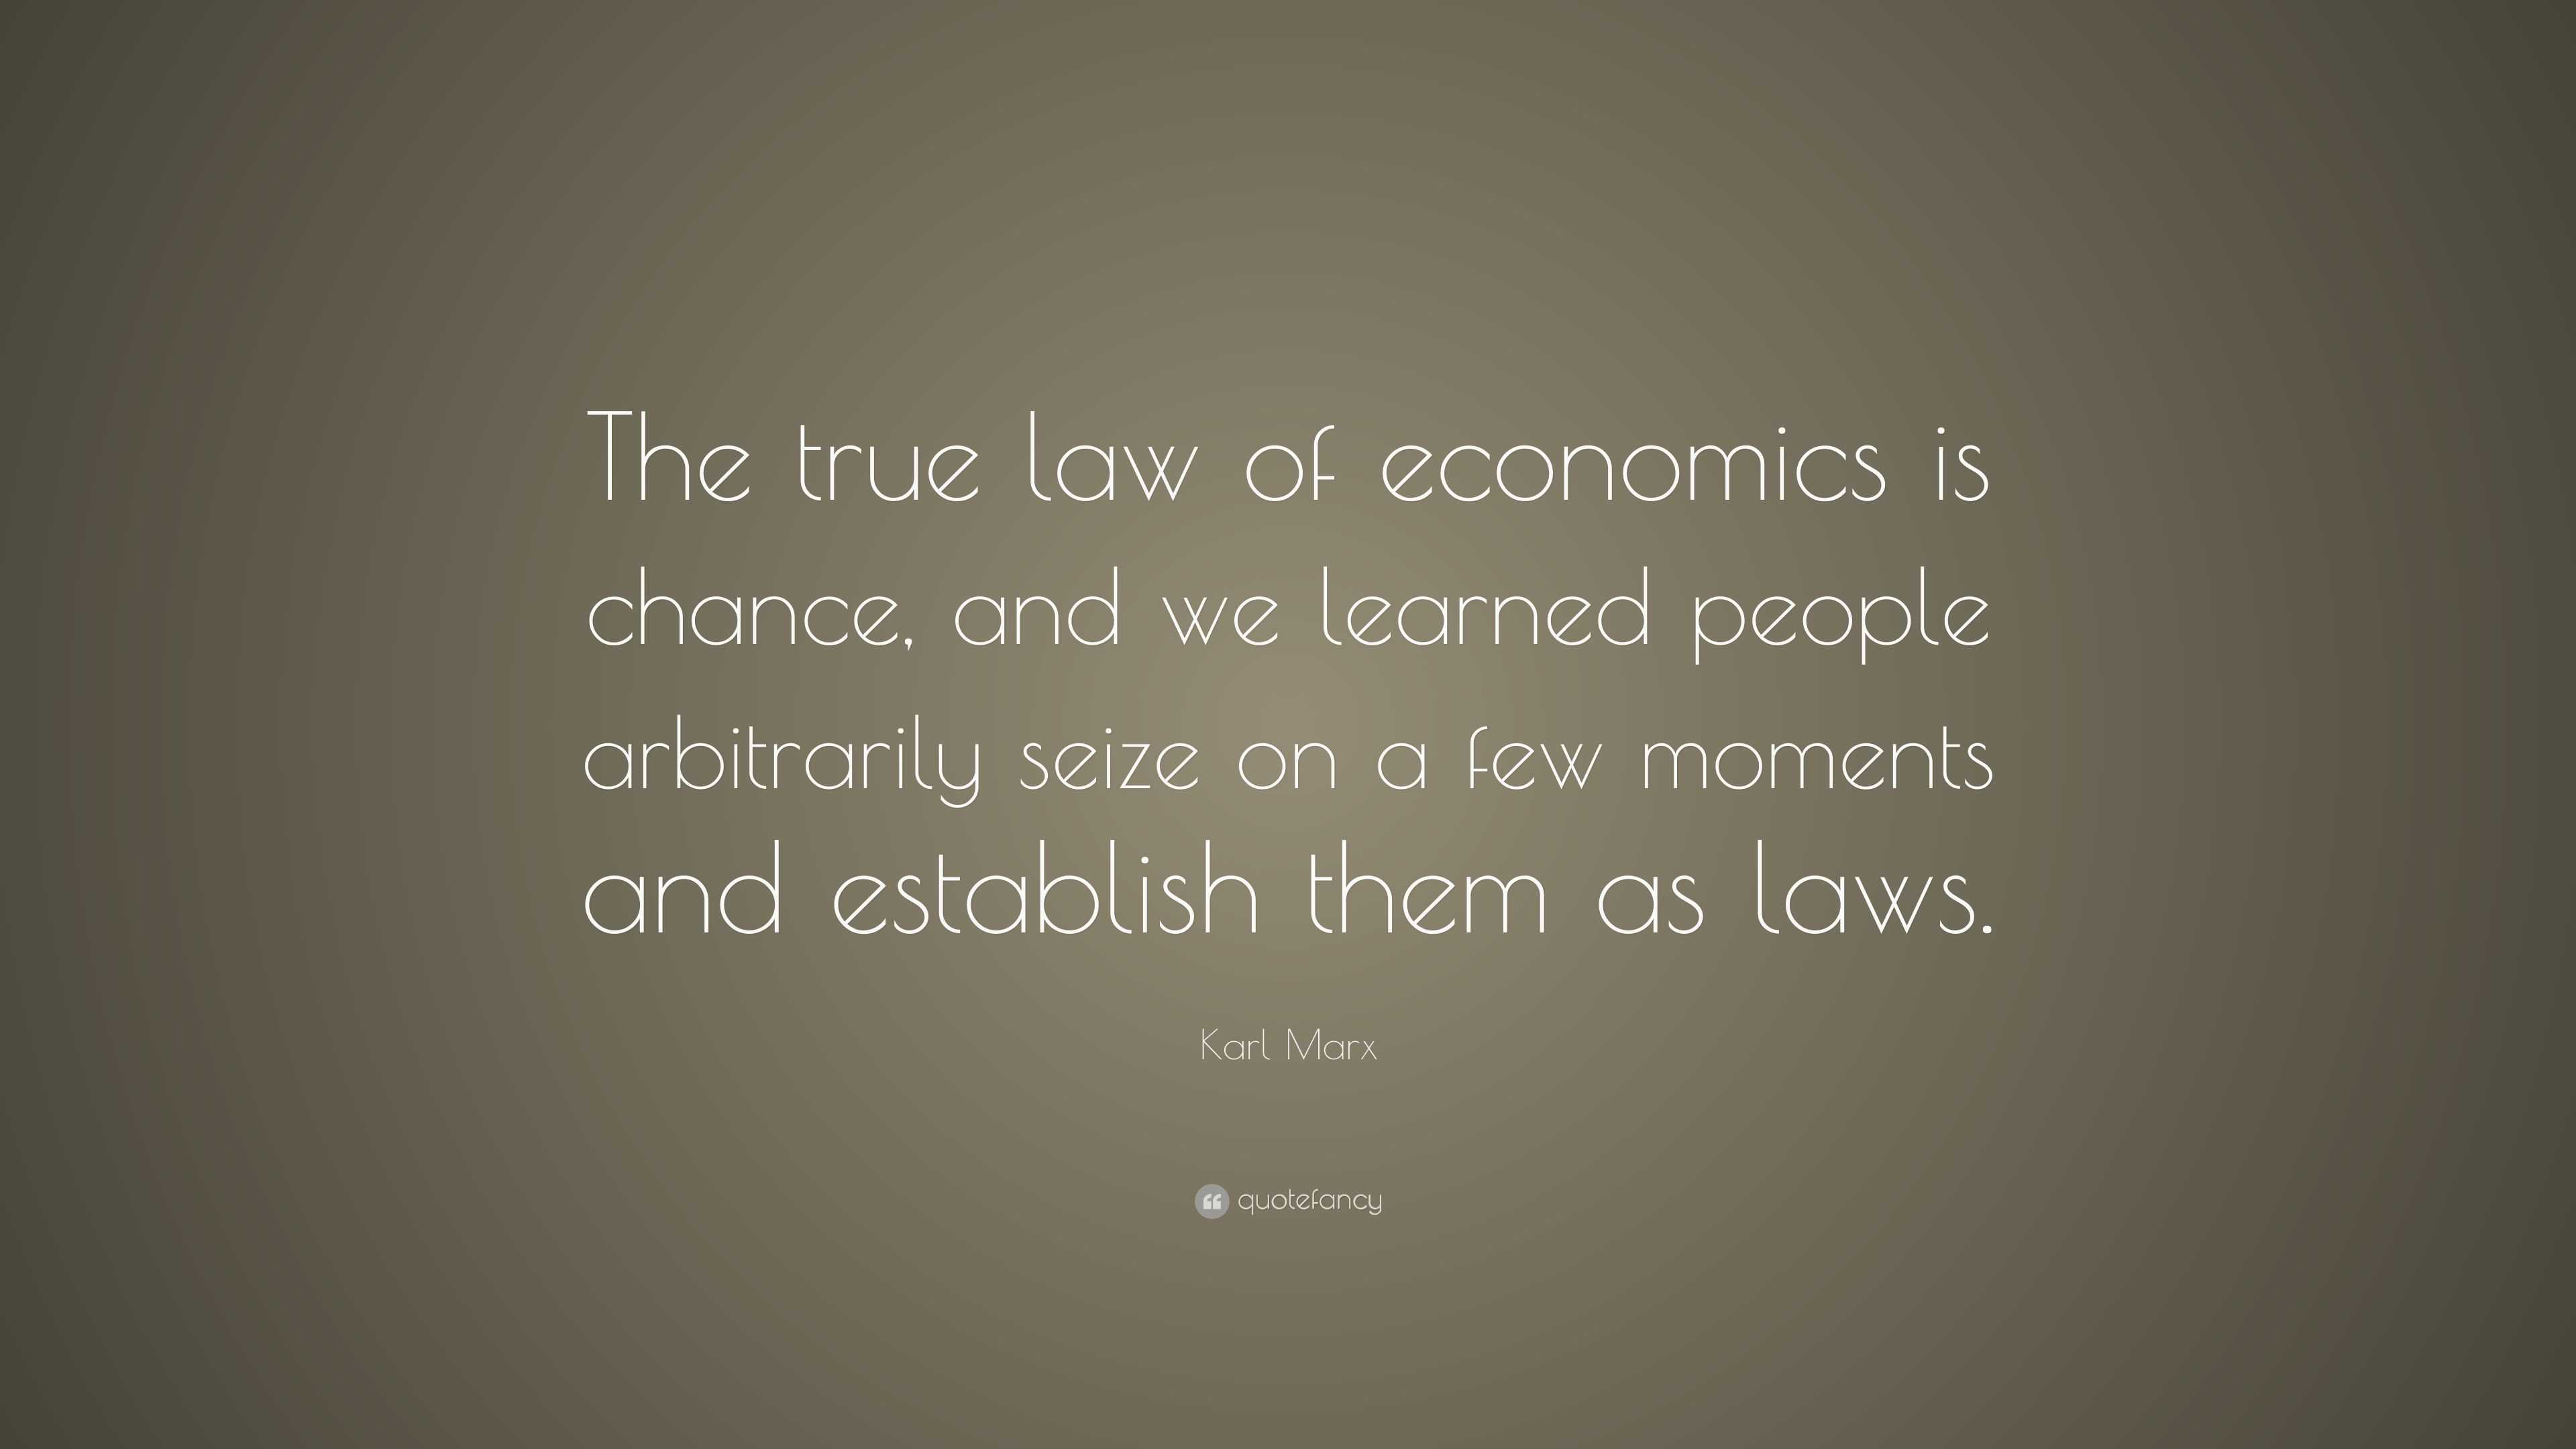 Karl Marx Quote: “The true law of economics is chance, and we learned ...